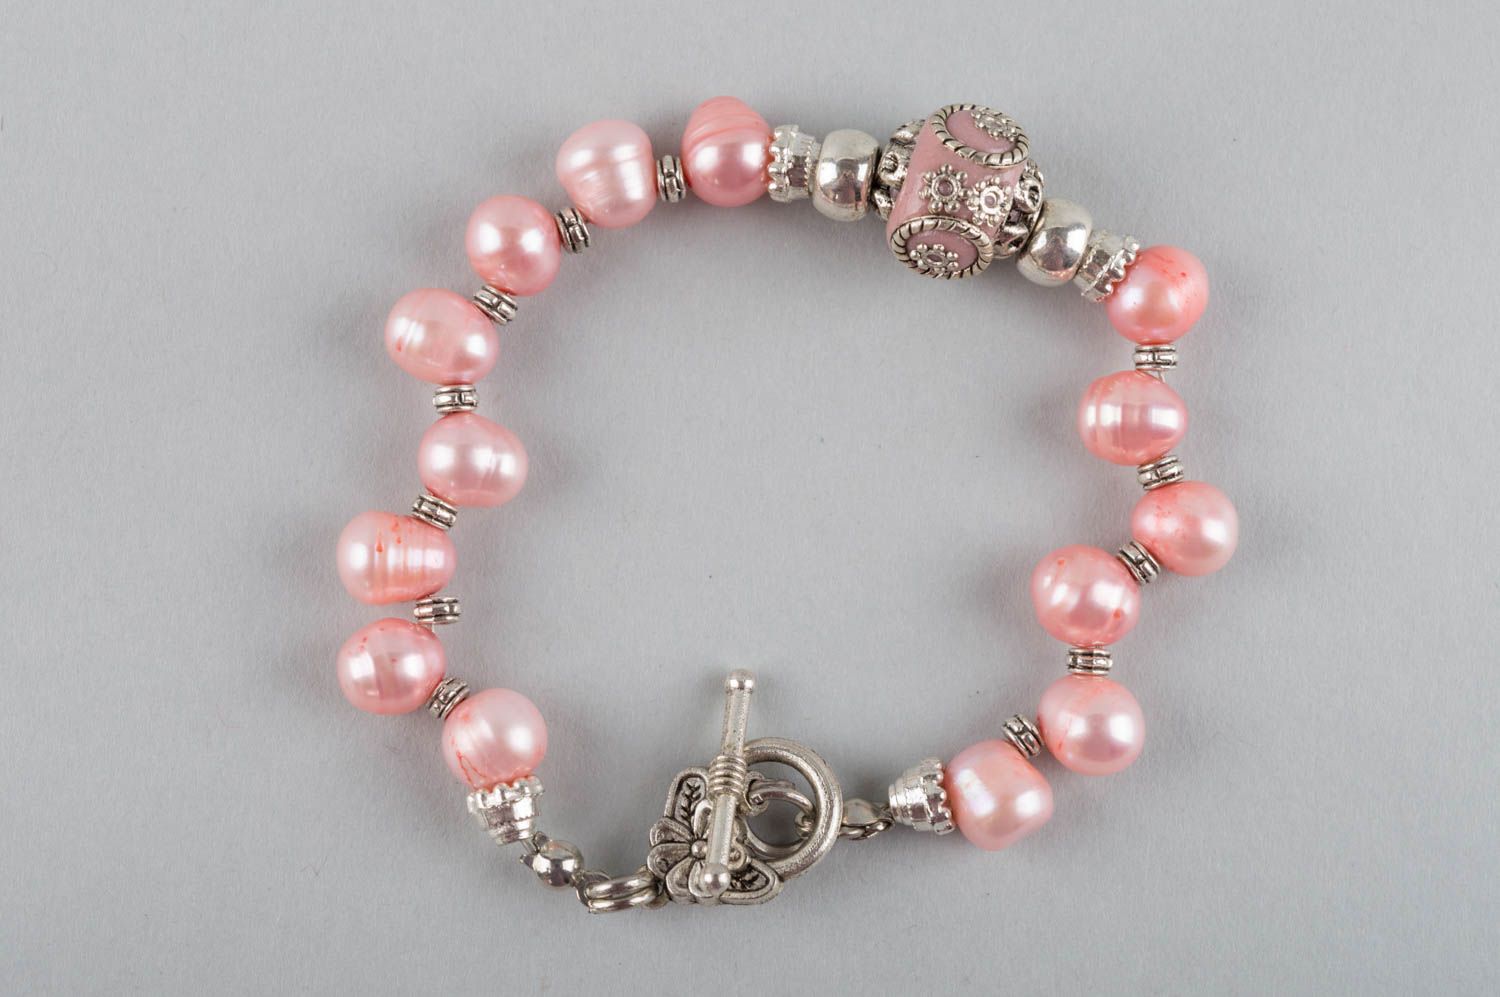 Handmade cute designer bracelet made of pearls and brass in pink coloring photo 2